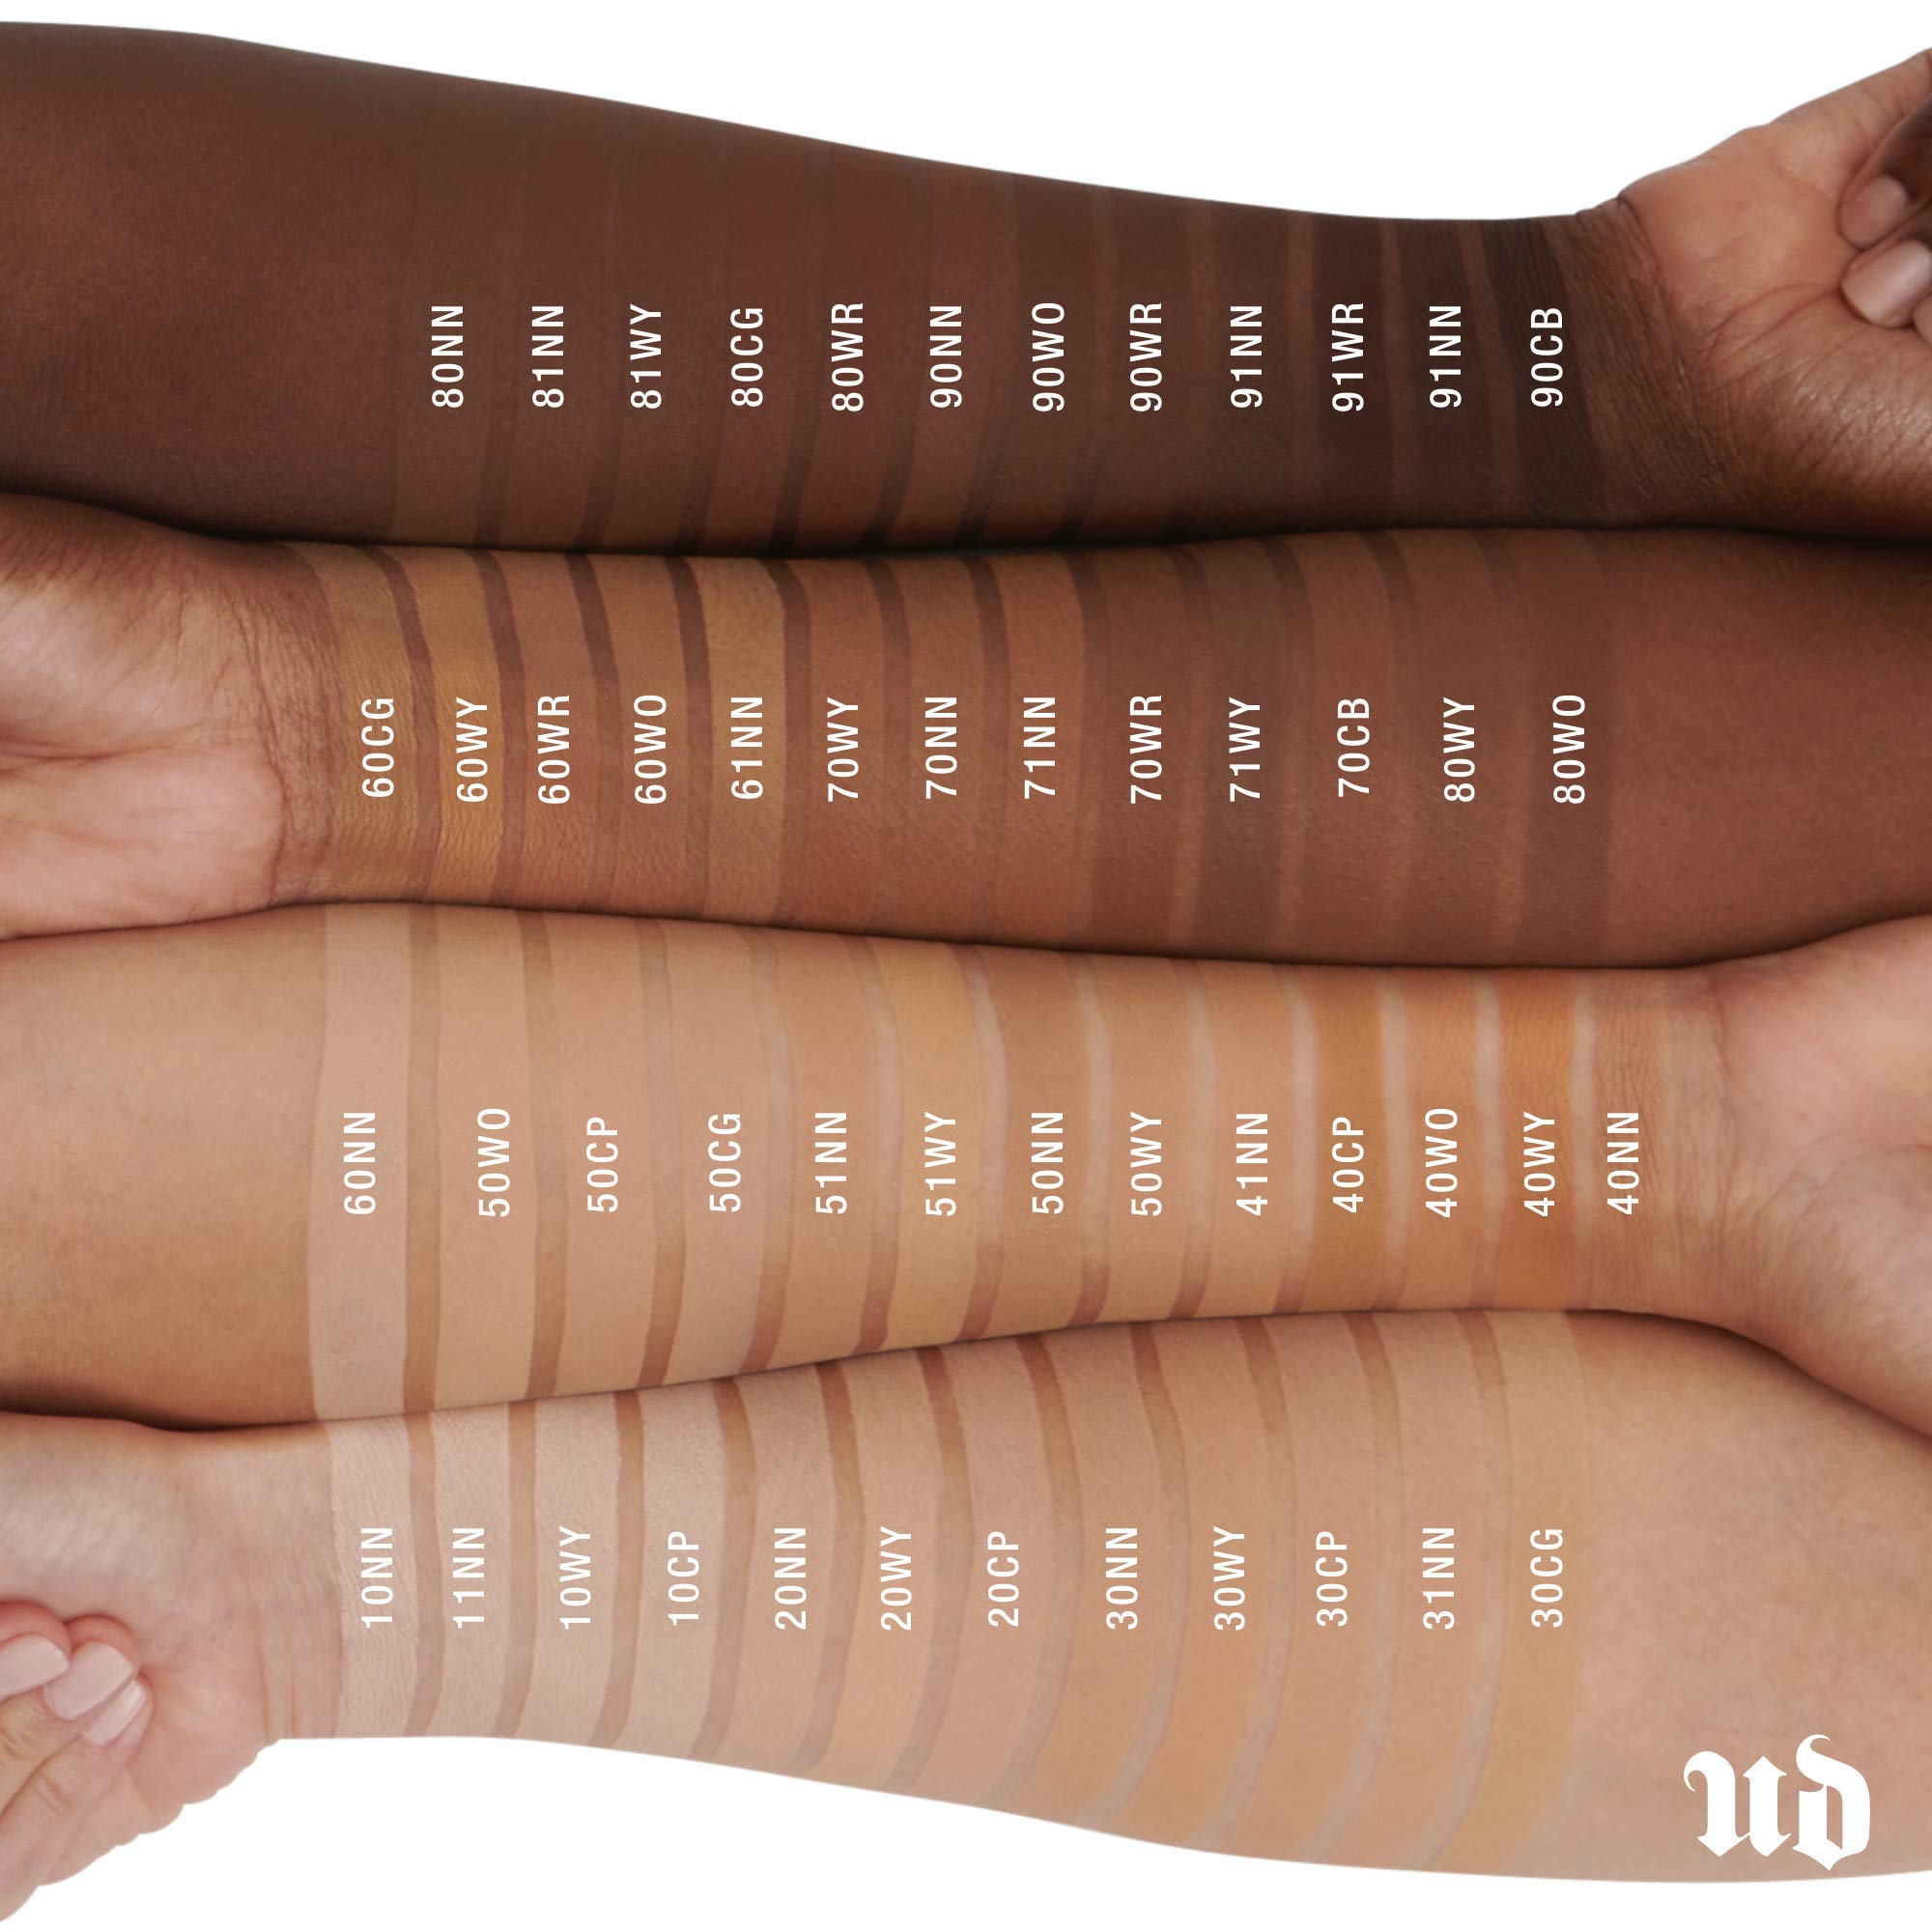 URBAN DECAY Stay Naked Weightless Liquid Foundation - Buildable Coverage with No Caking - Matte Finish Lasts Up To 24 Hours - Waterproof & Sweatproof - 1.0 oz